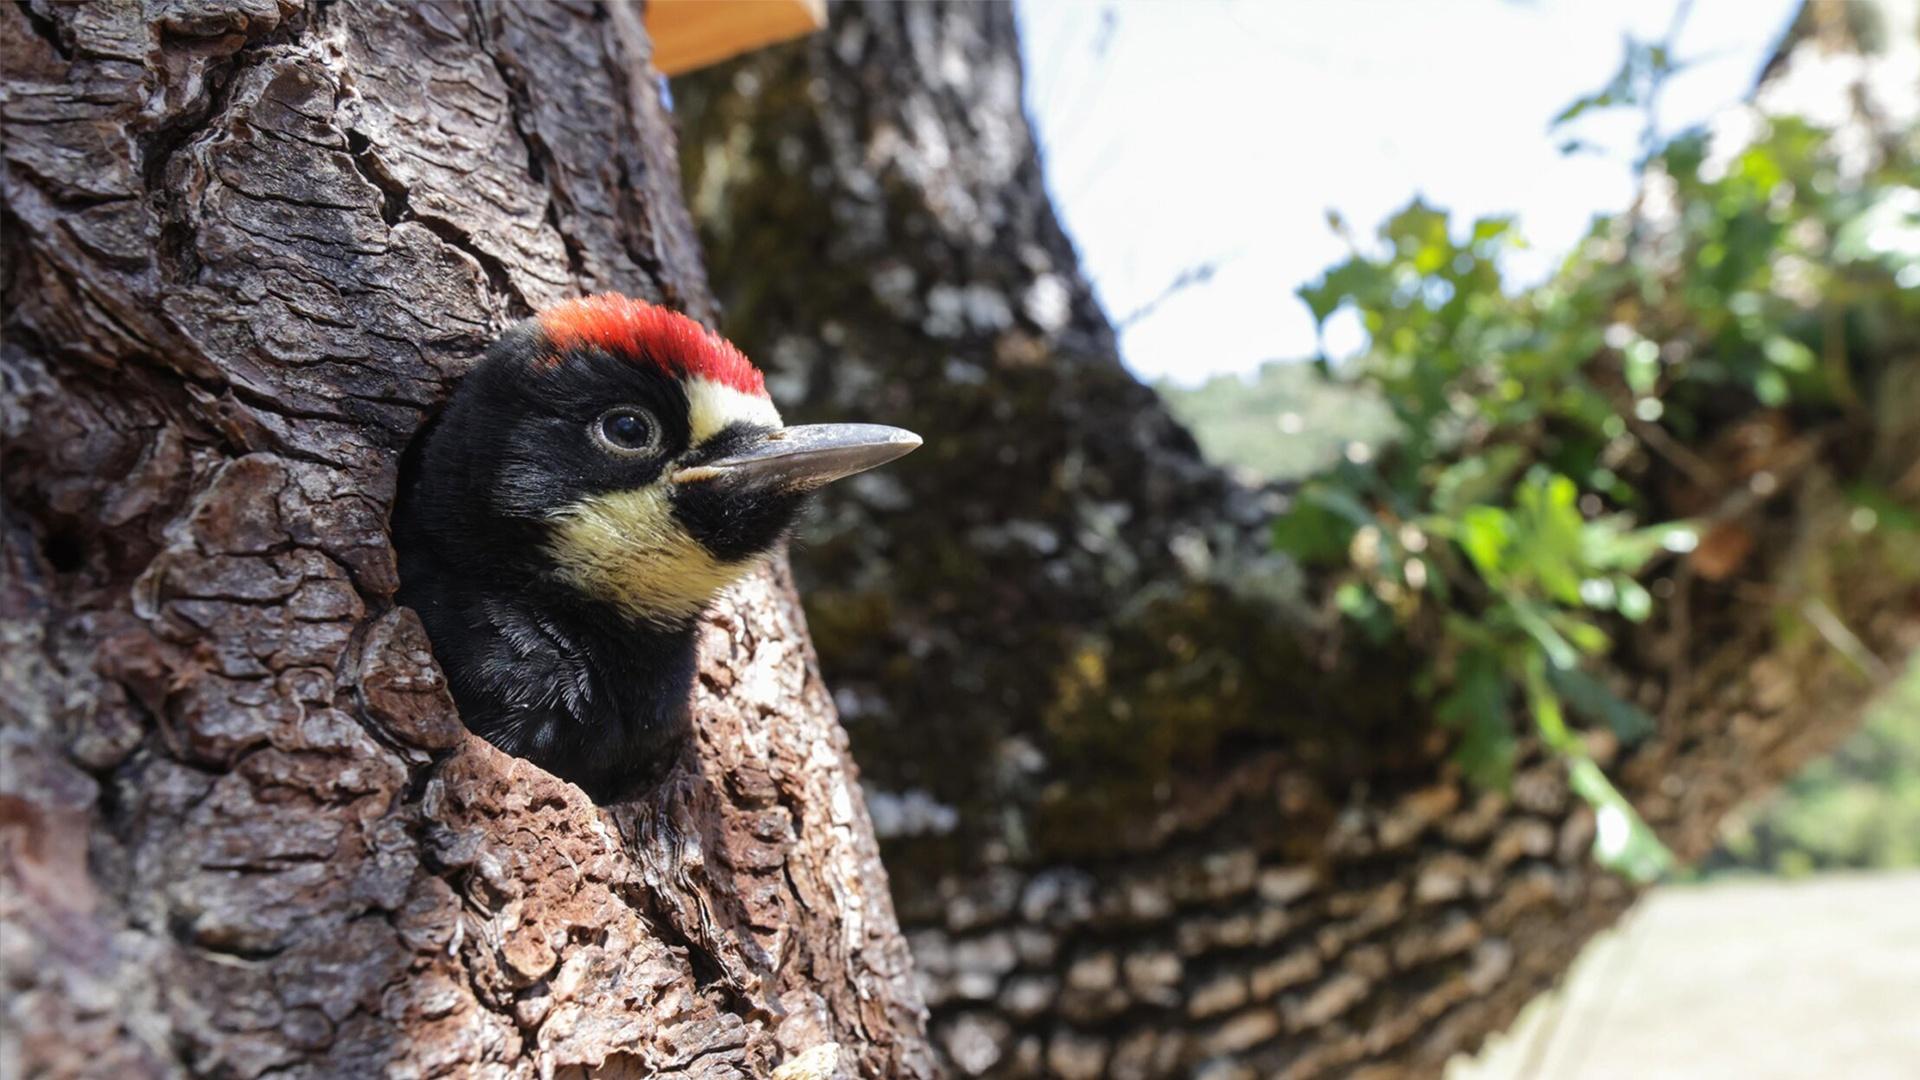 A woodpecker with red forehead pops out of hole in tree